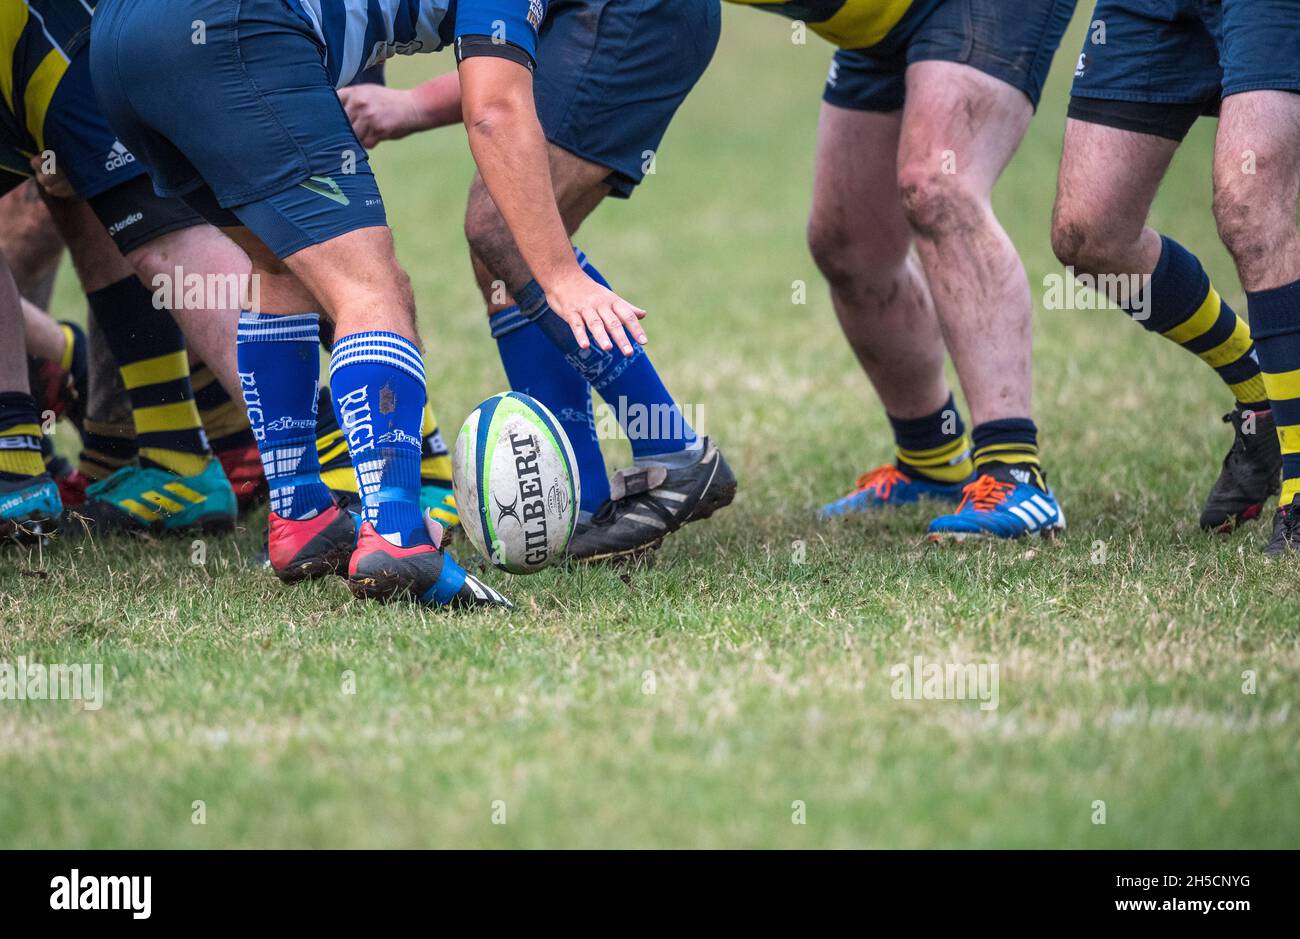 Amateur Rugby Union players playing in a league game. Stock Photo